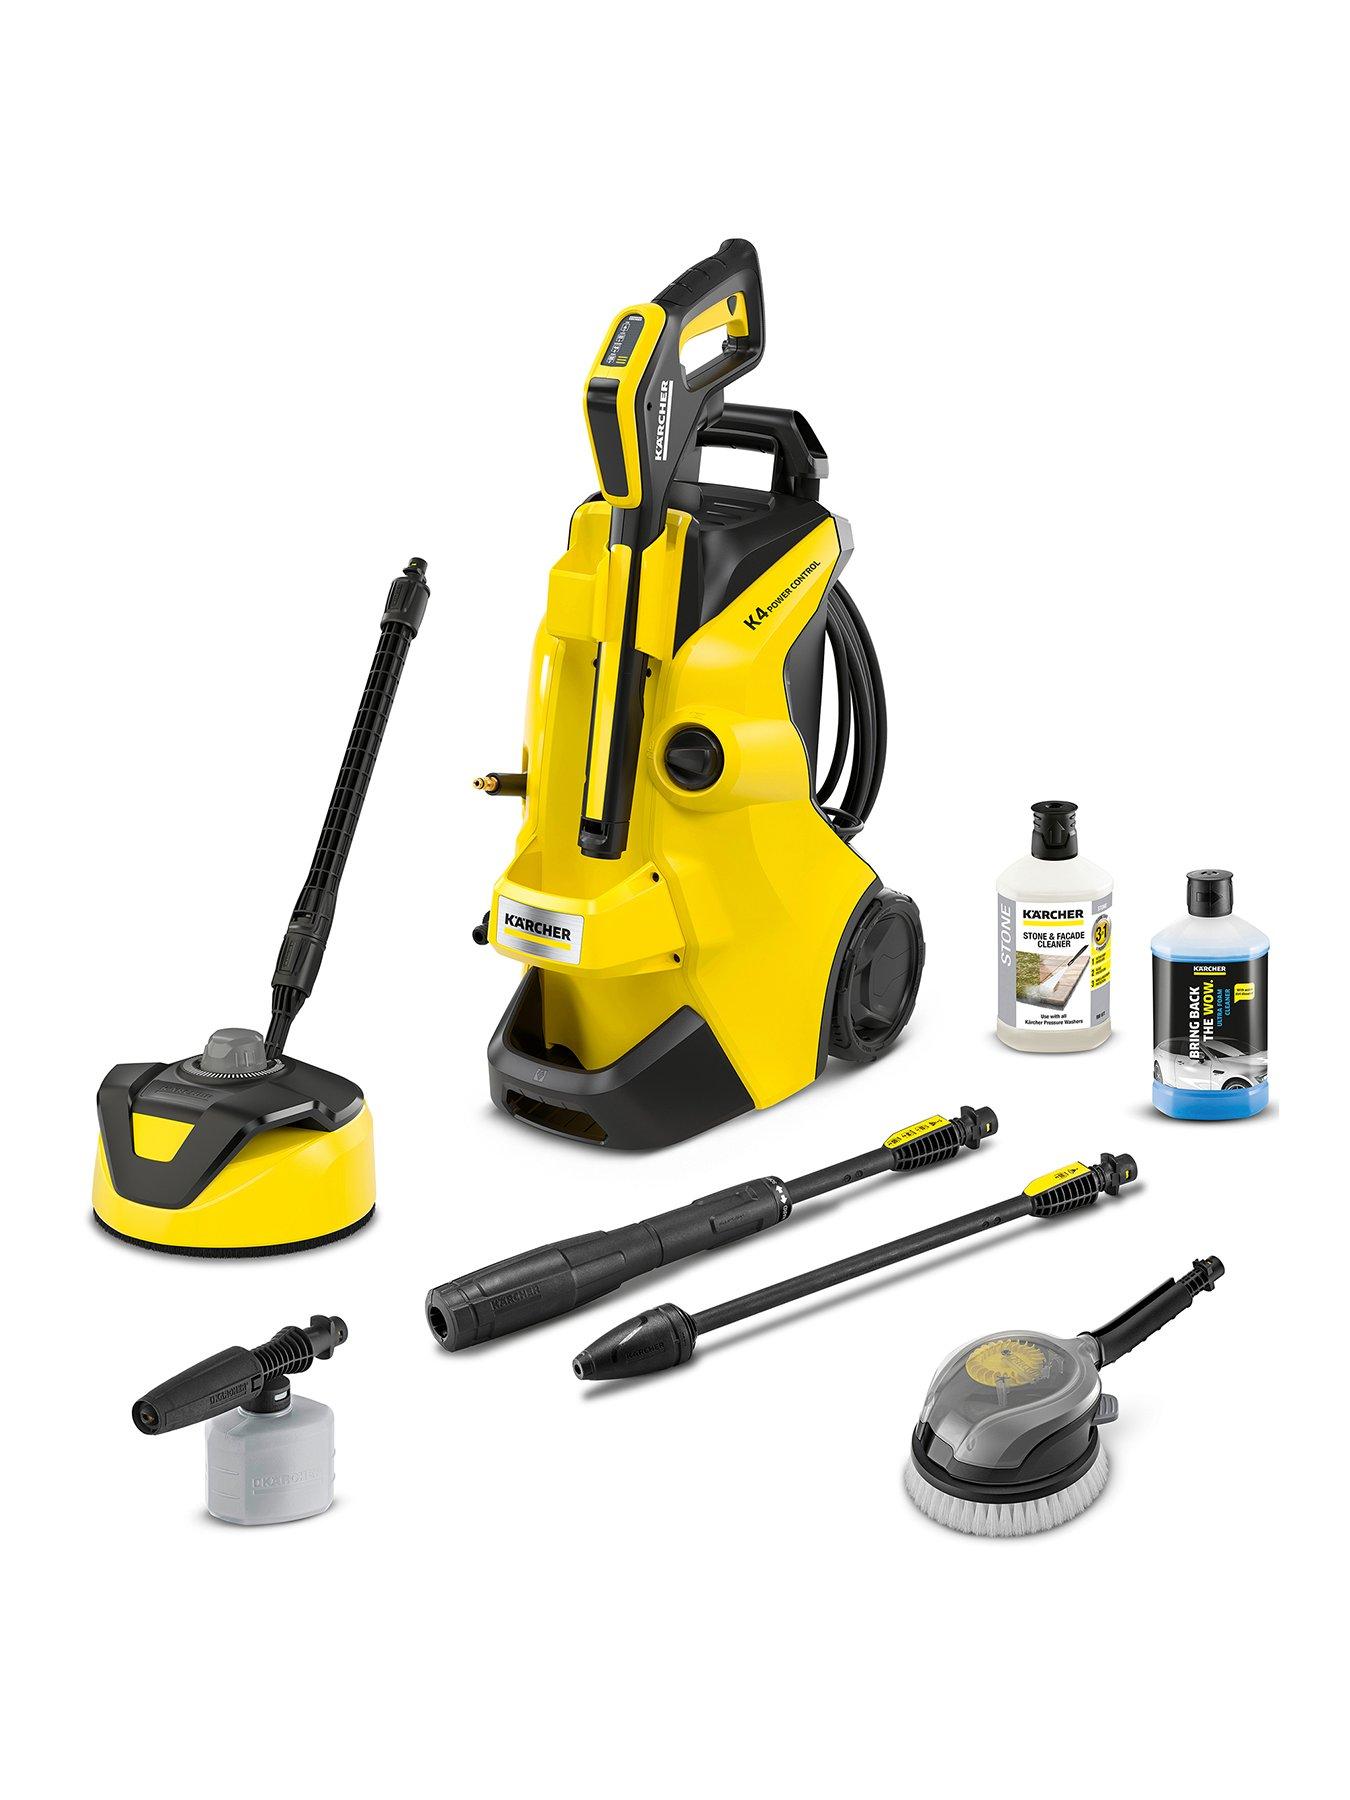 Kärcher K4 vs Kärcher K7: which pressure washer is right for you?